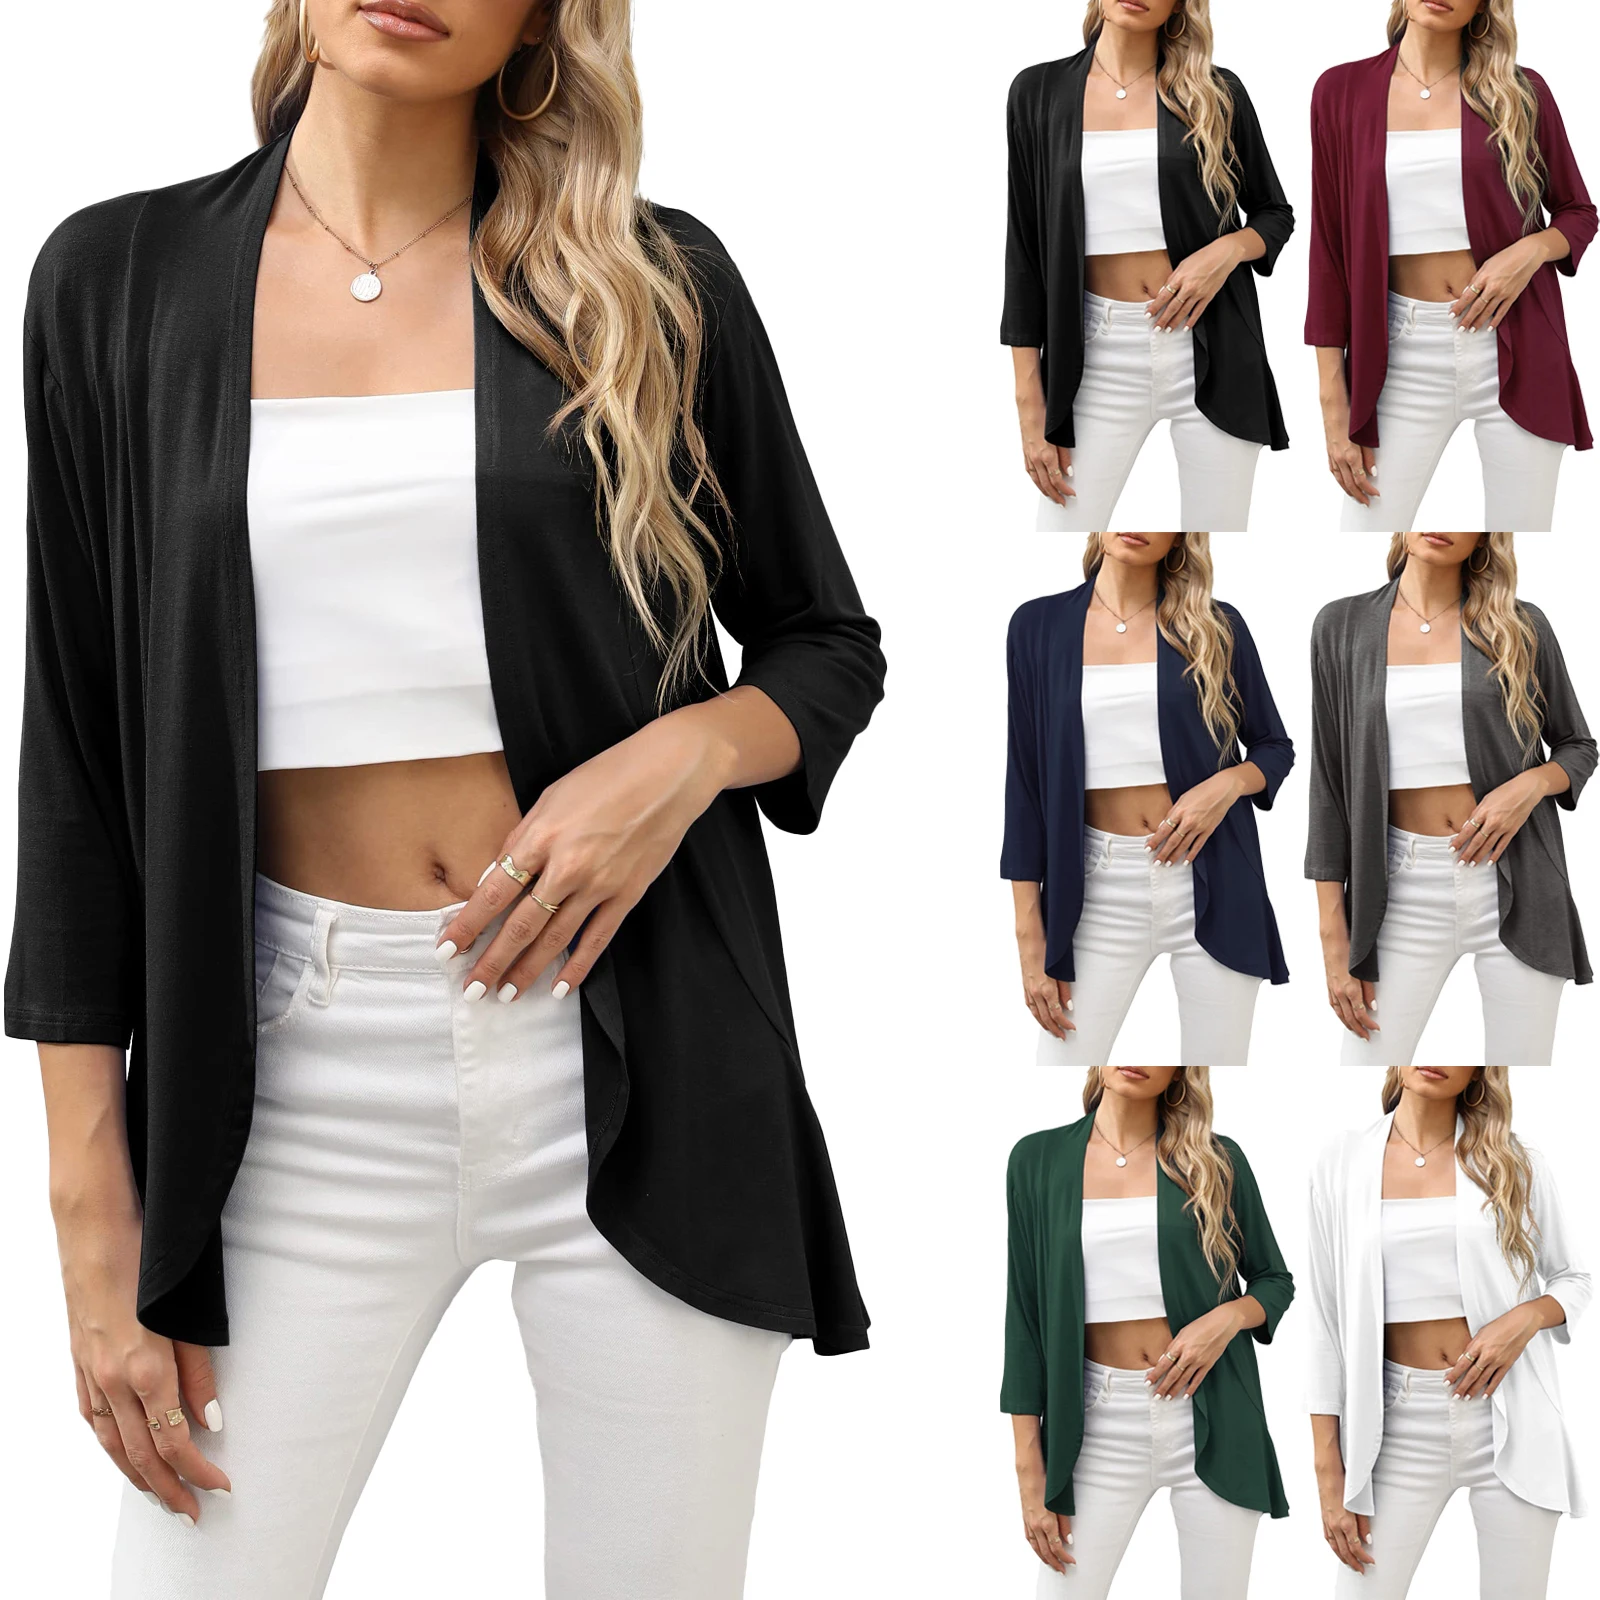 

2022 Women's Three Quarter Sleeve Cardigan Open-Front Solid Color Ruffled Drop Hem Tops, Casual Street Style Thin Outwear